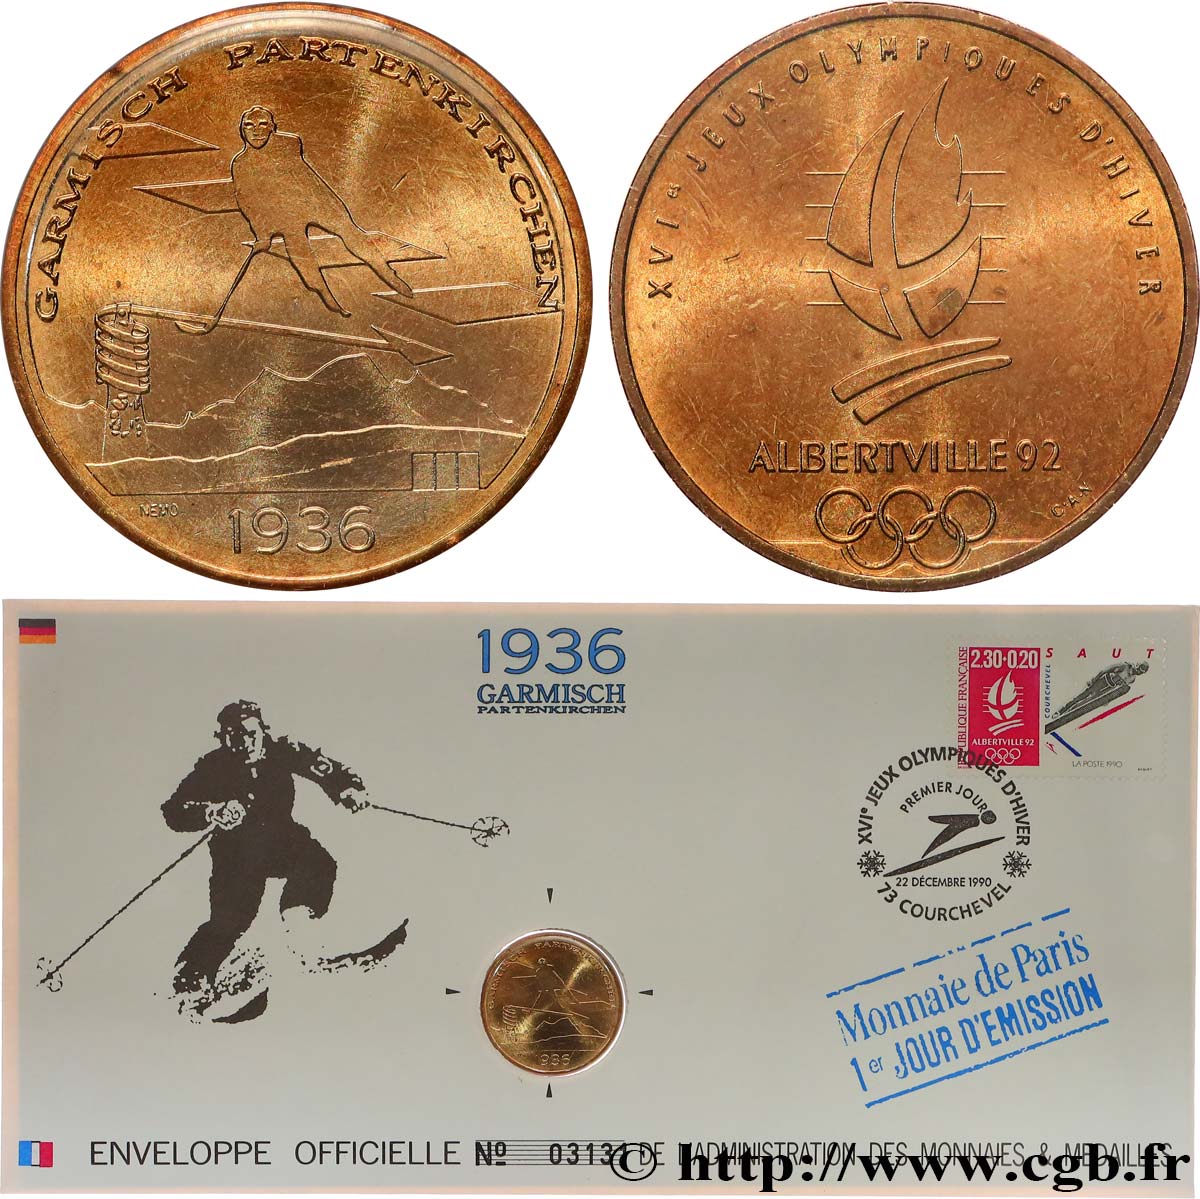 SPORTS Enveloppe “Timbre médaille” n°7 FDC